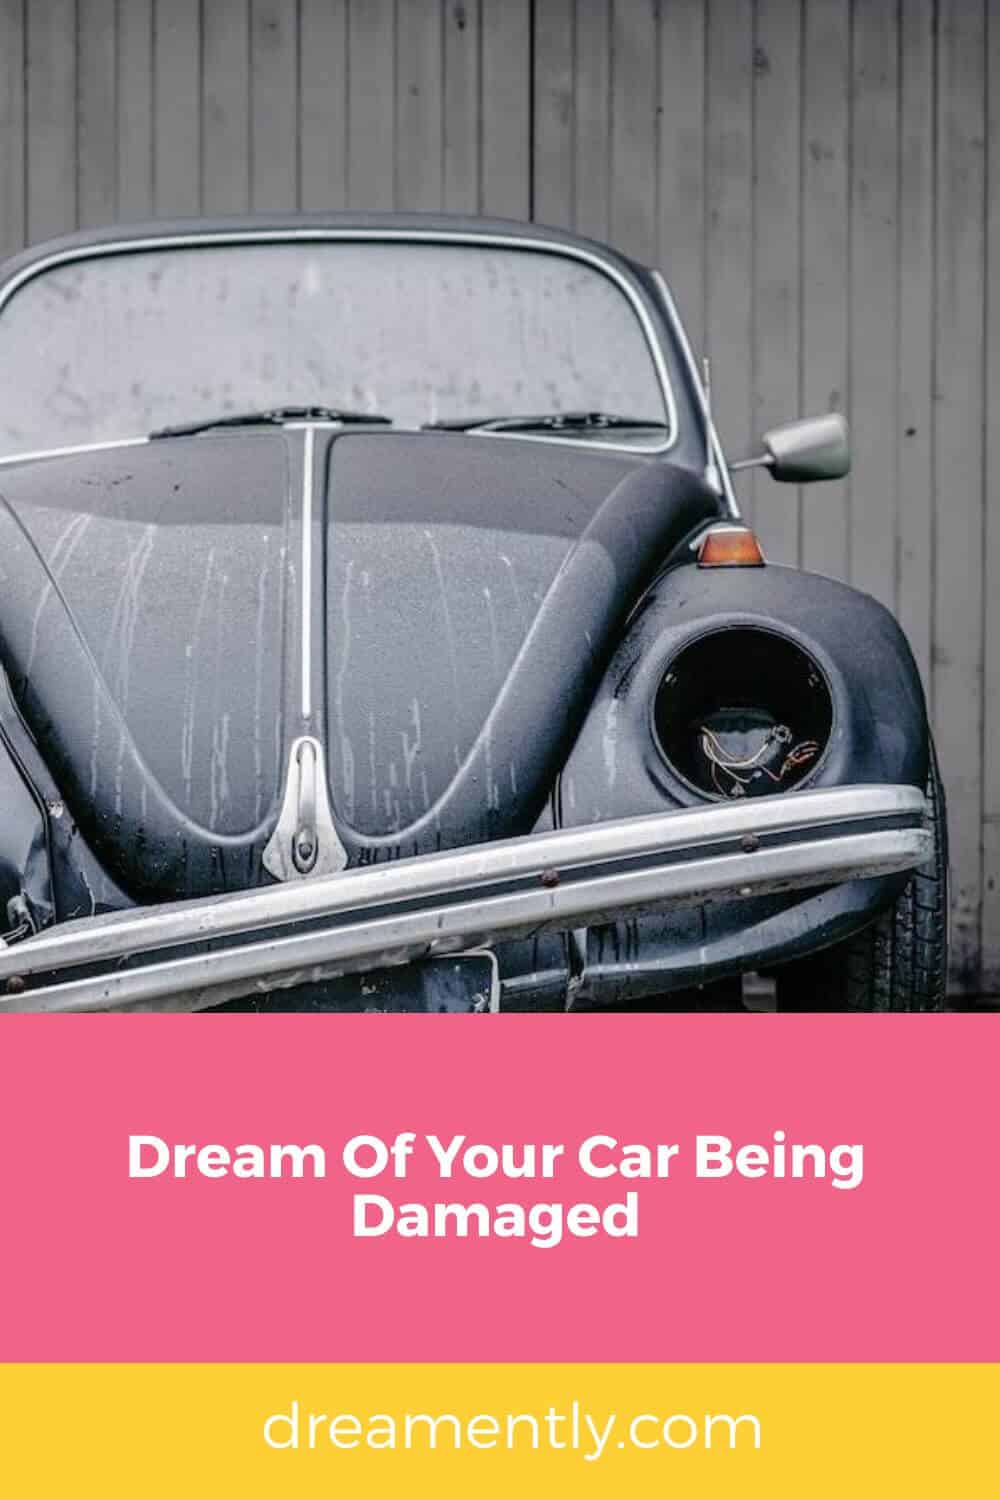 Dream Of Your Car Being Damaged (2)